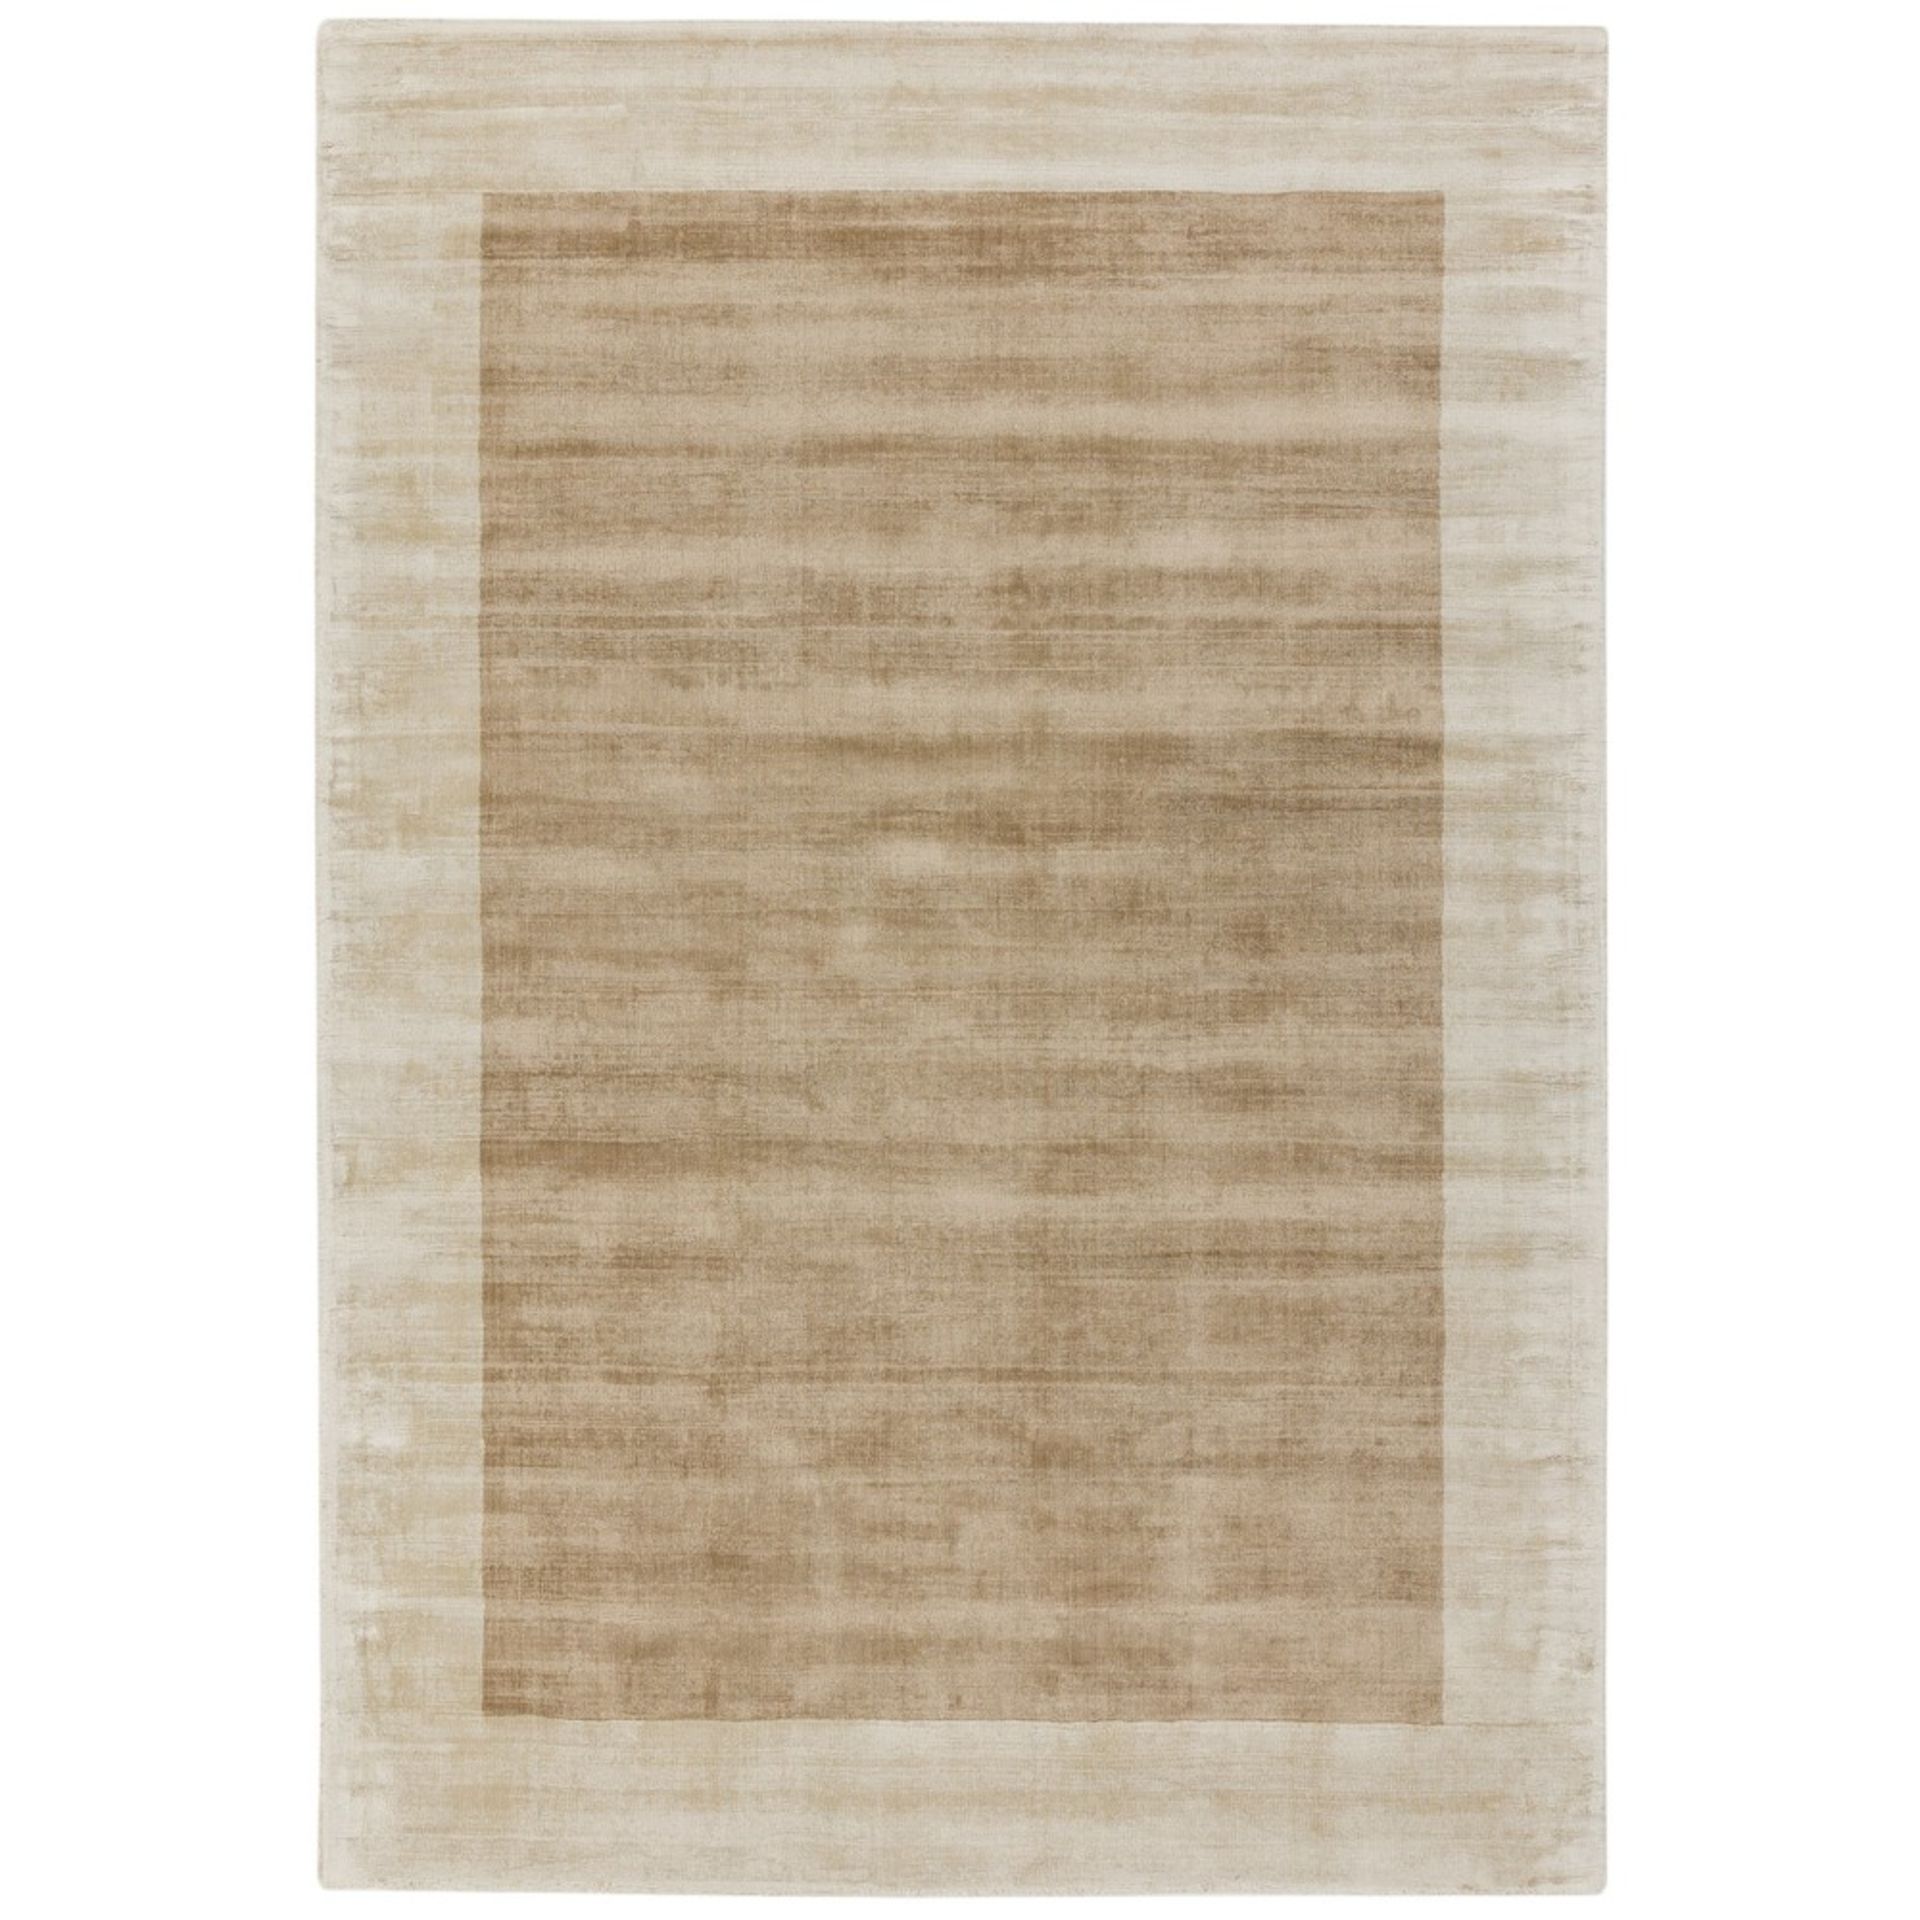 1 x Asiatic 'Blade Boarder' Hand Woven Heavyweight Indian Rug - Colour: Putty / Champagne - New - Image 2 of 8